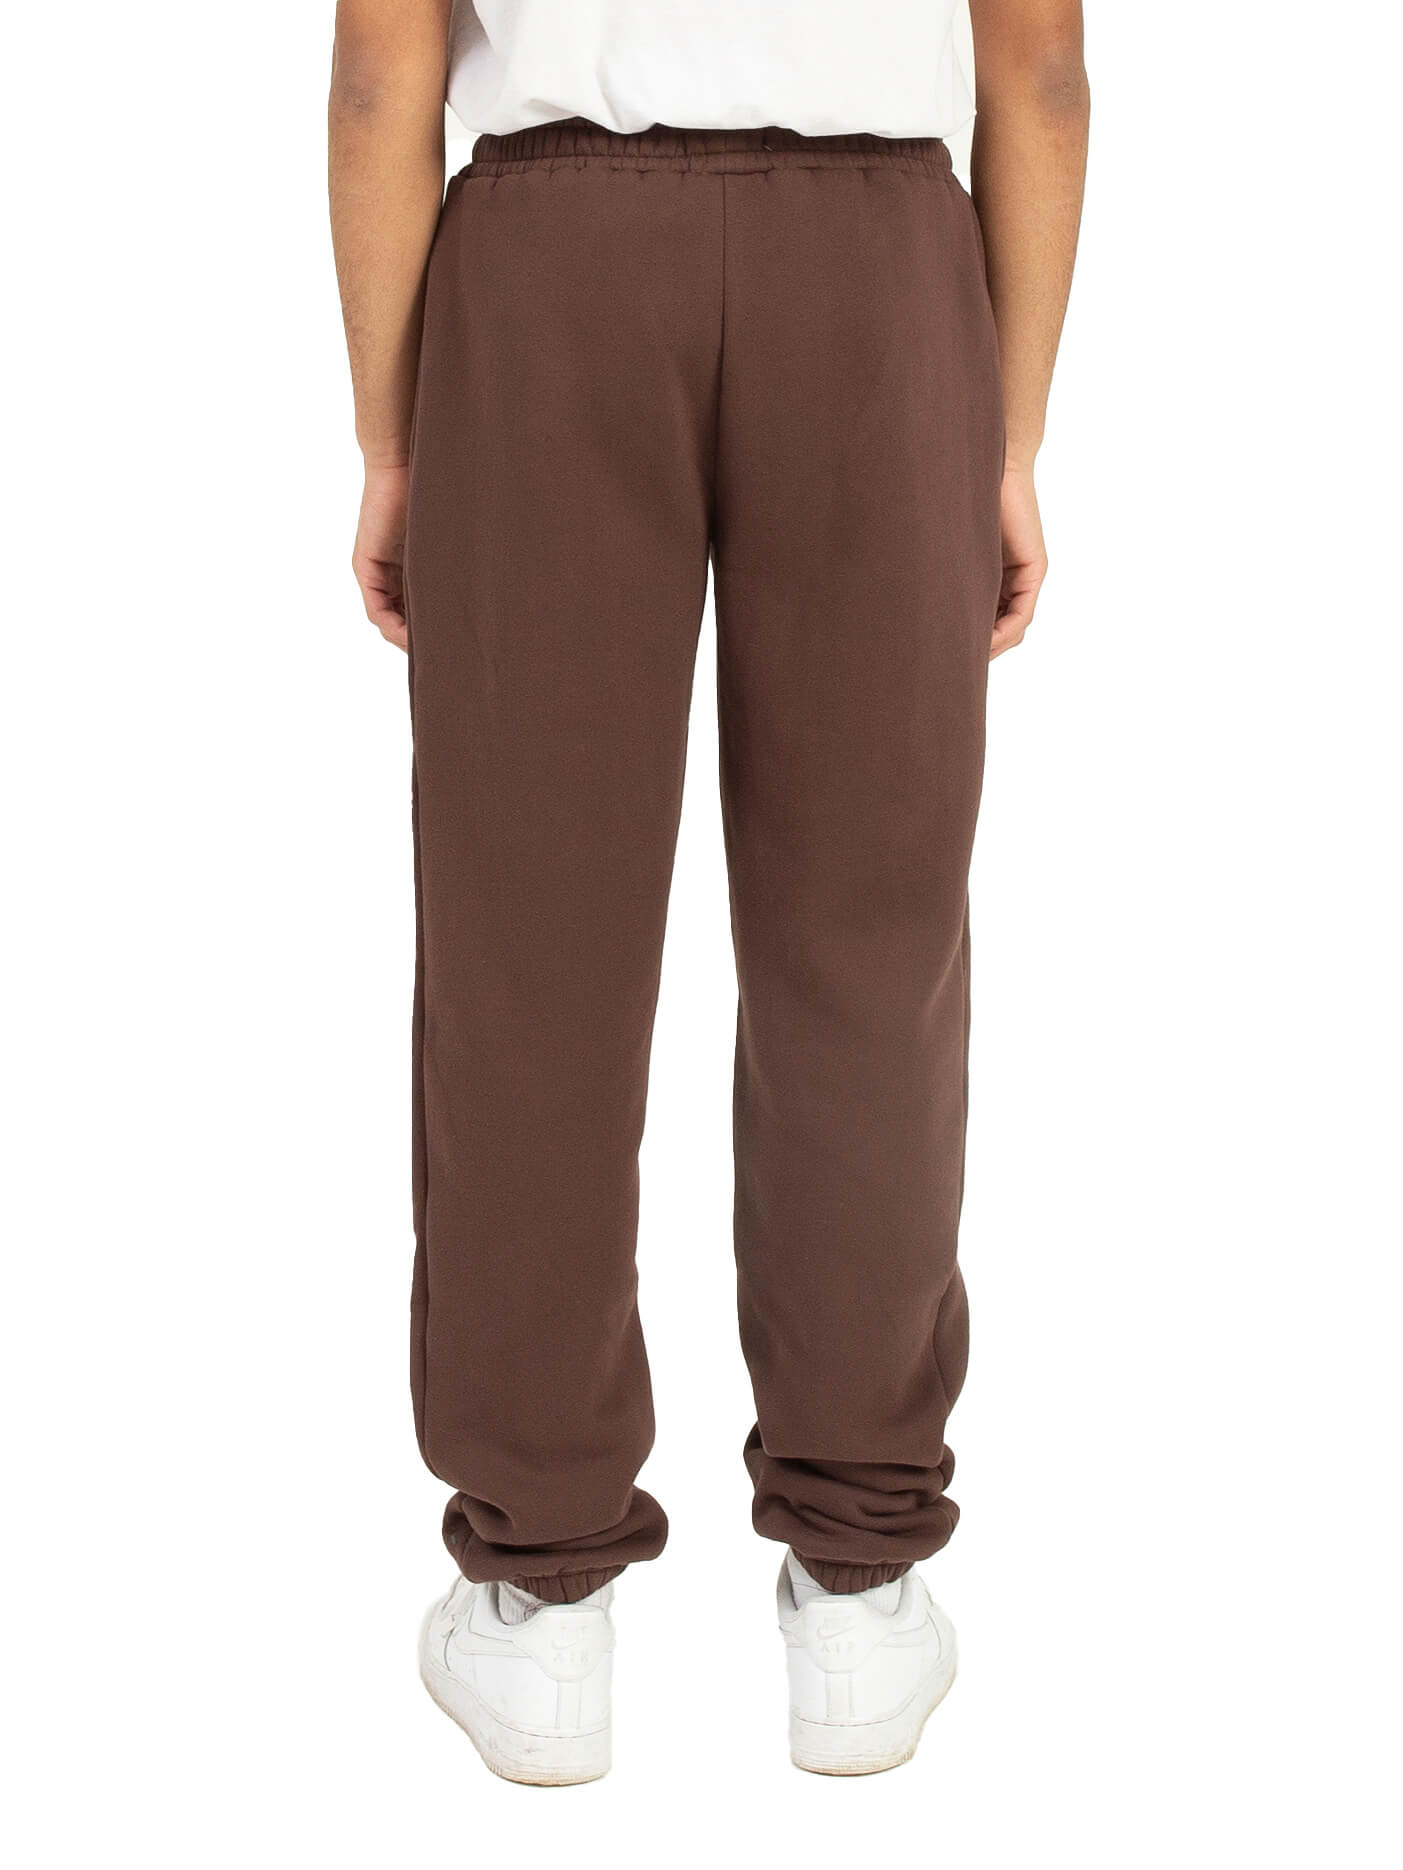 Kaylo - Brown Sweatpants with Rubber Patch